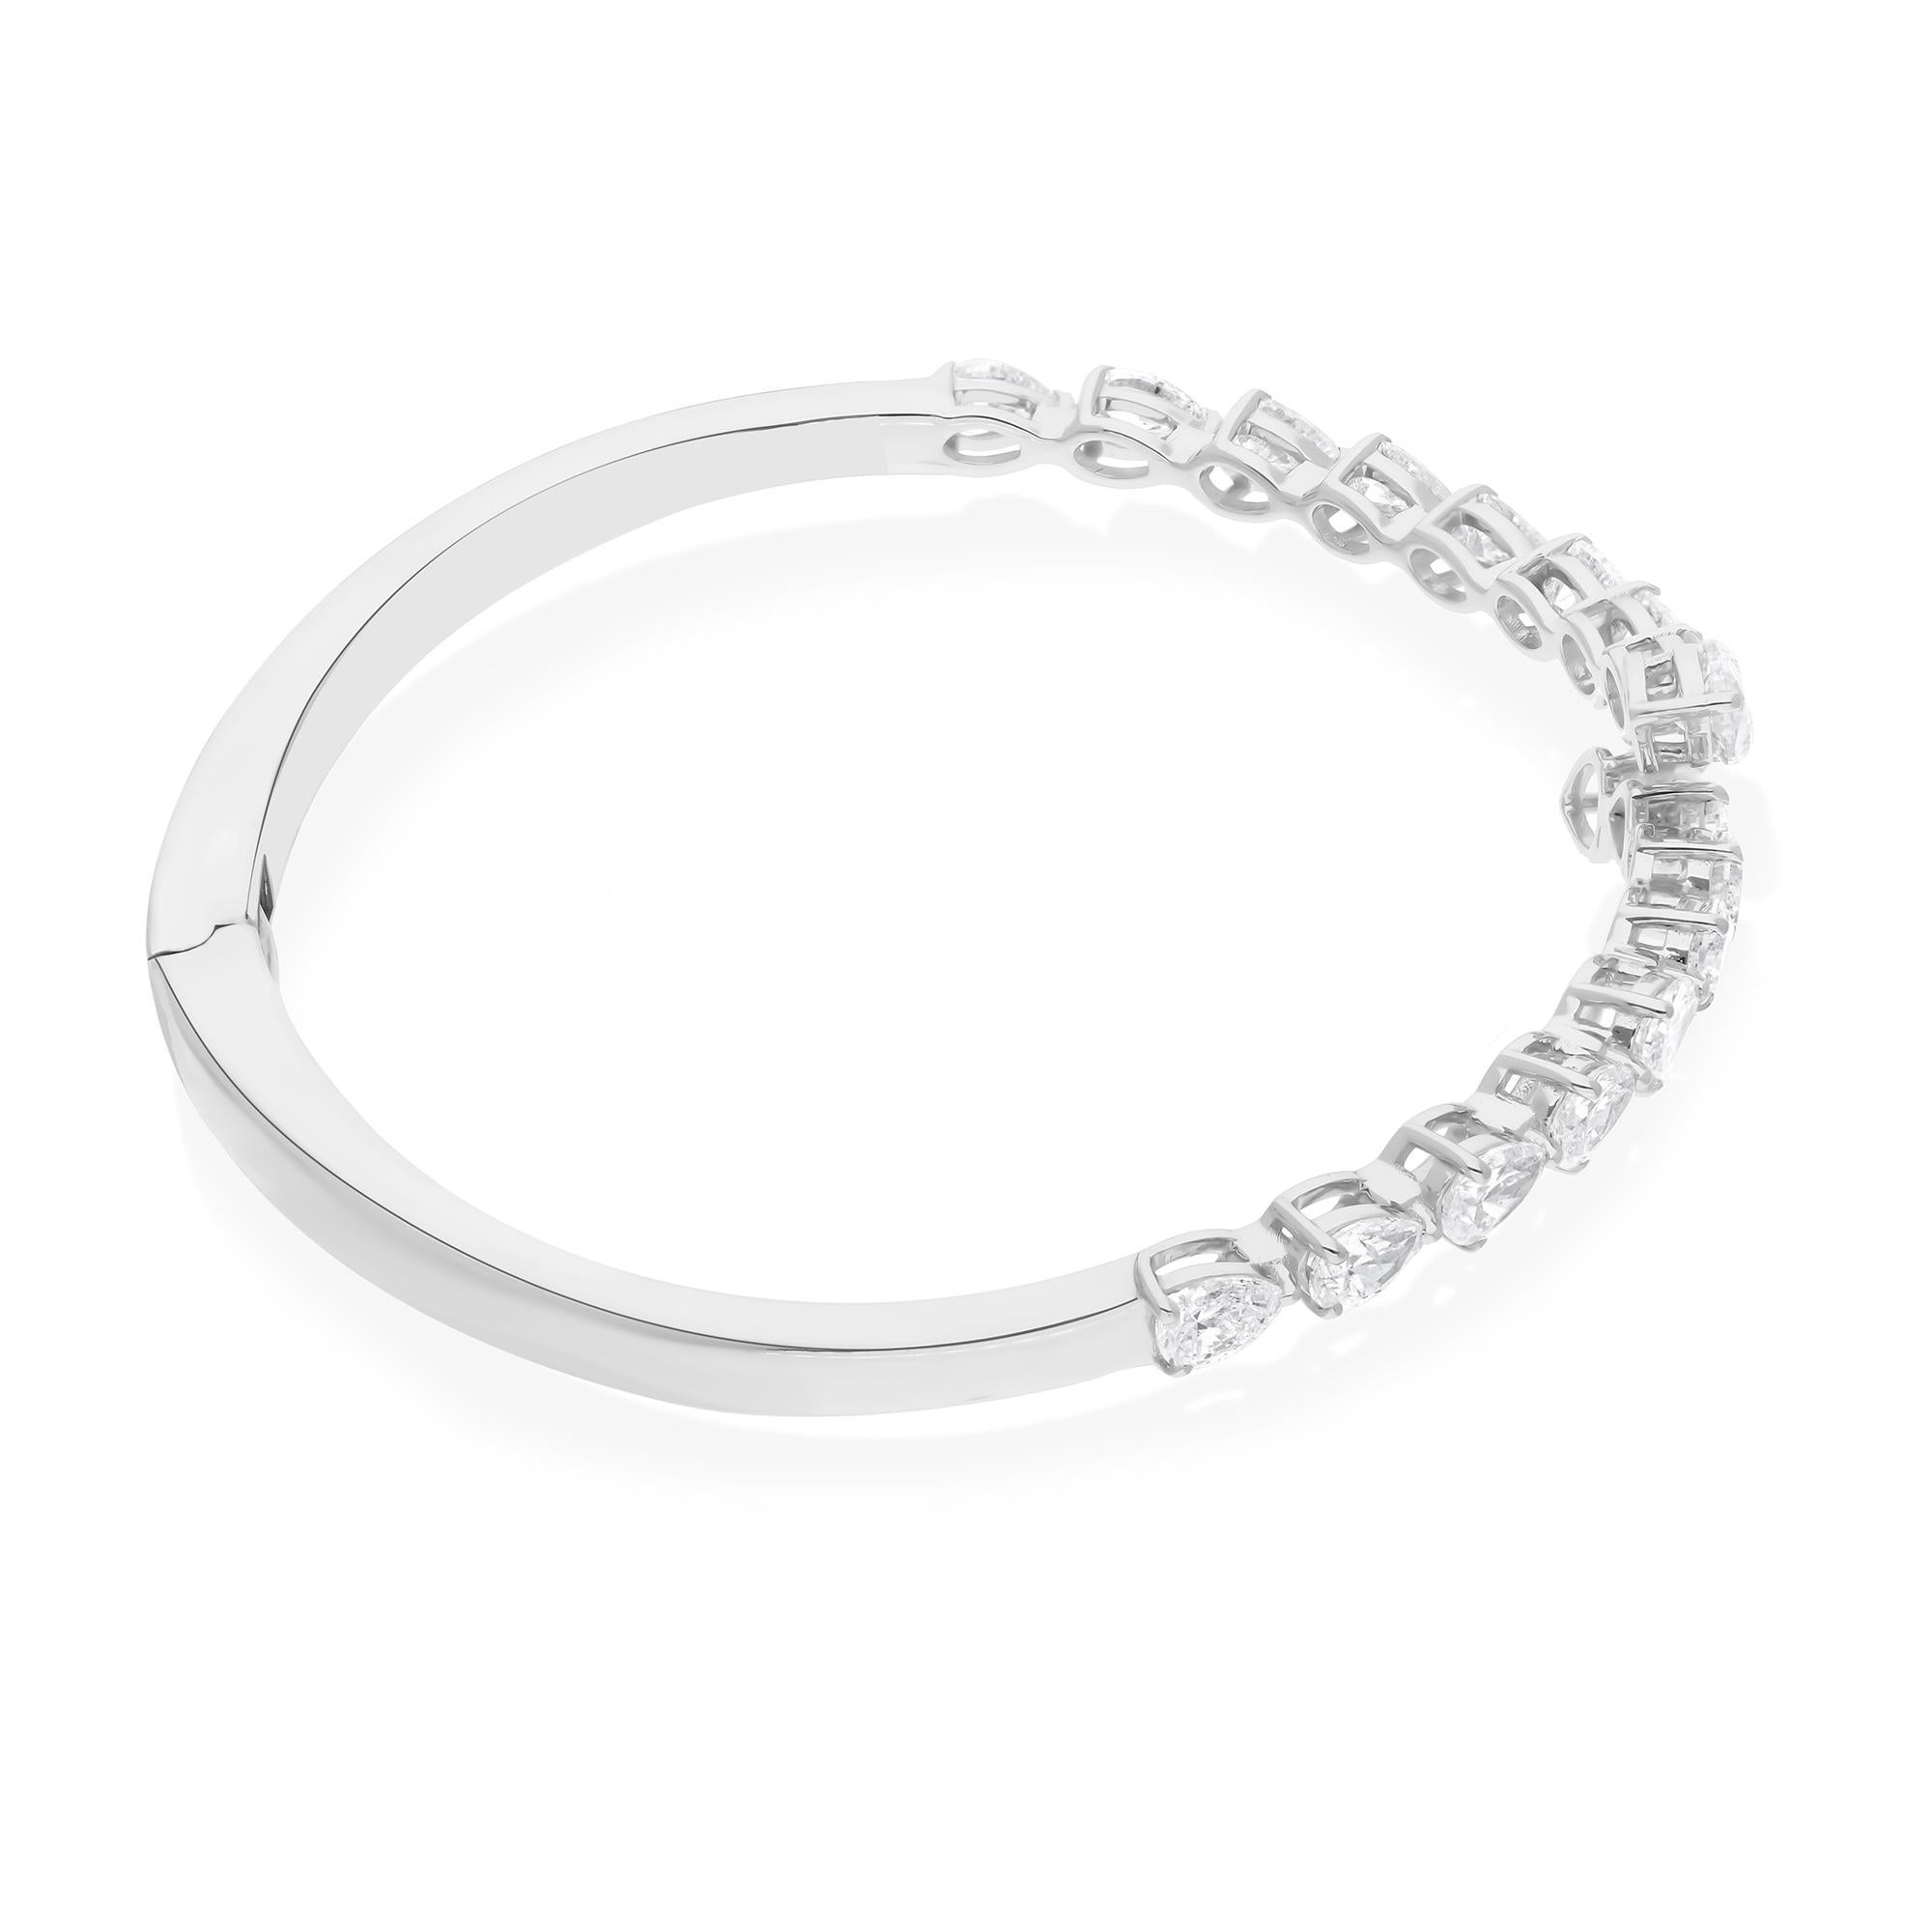 Crafted with meticulous attention to detail, this breathtaking cuff bangle bracelet features a stunning pear-shaped diamond at its focal point. Encased in lustrous 18 karat white gold, this timeless piece exudes elegance and sophistication.

Item